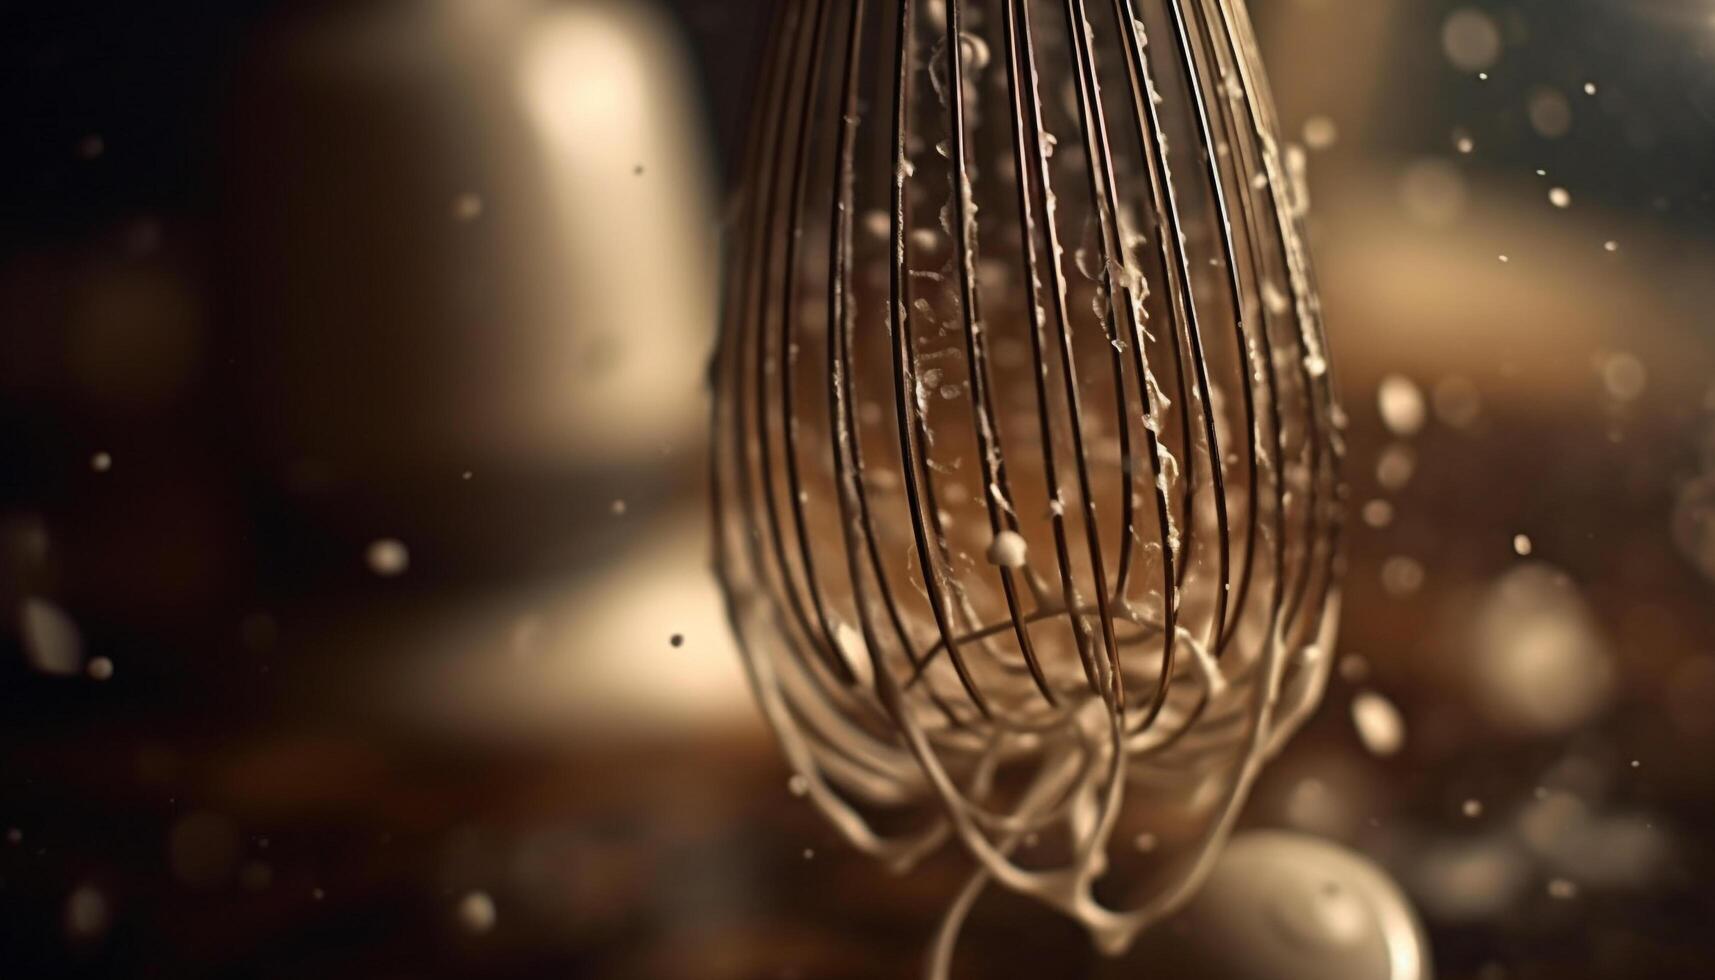 A glowing, abstract decoration hanging from clean, transparent glass generated by AI photo